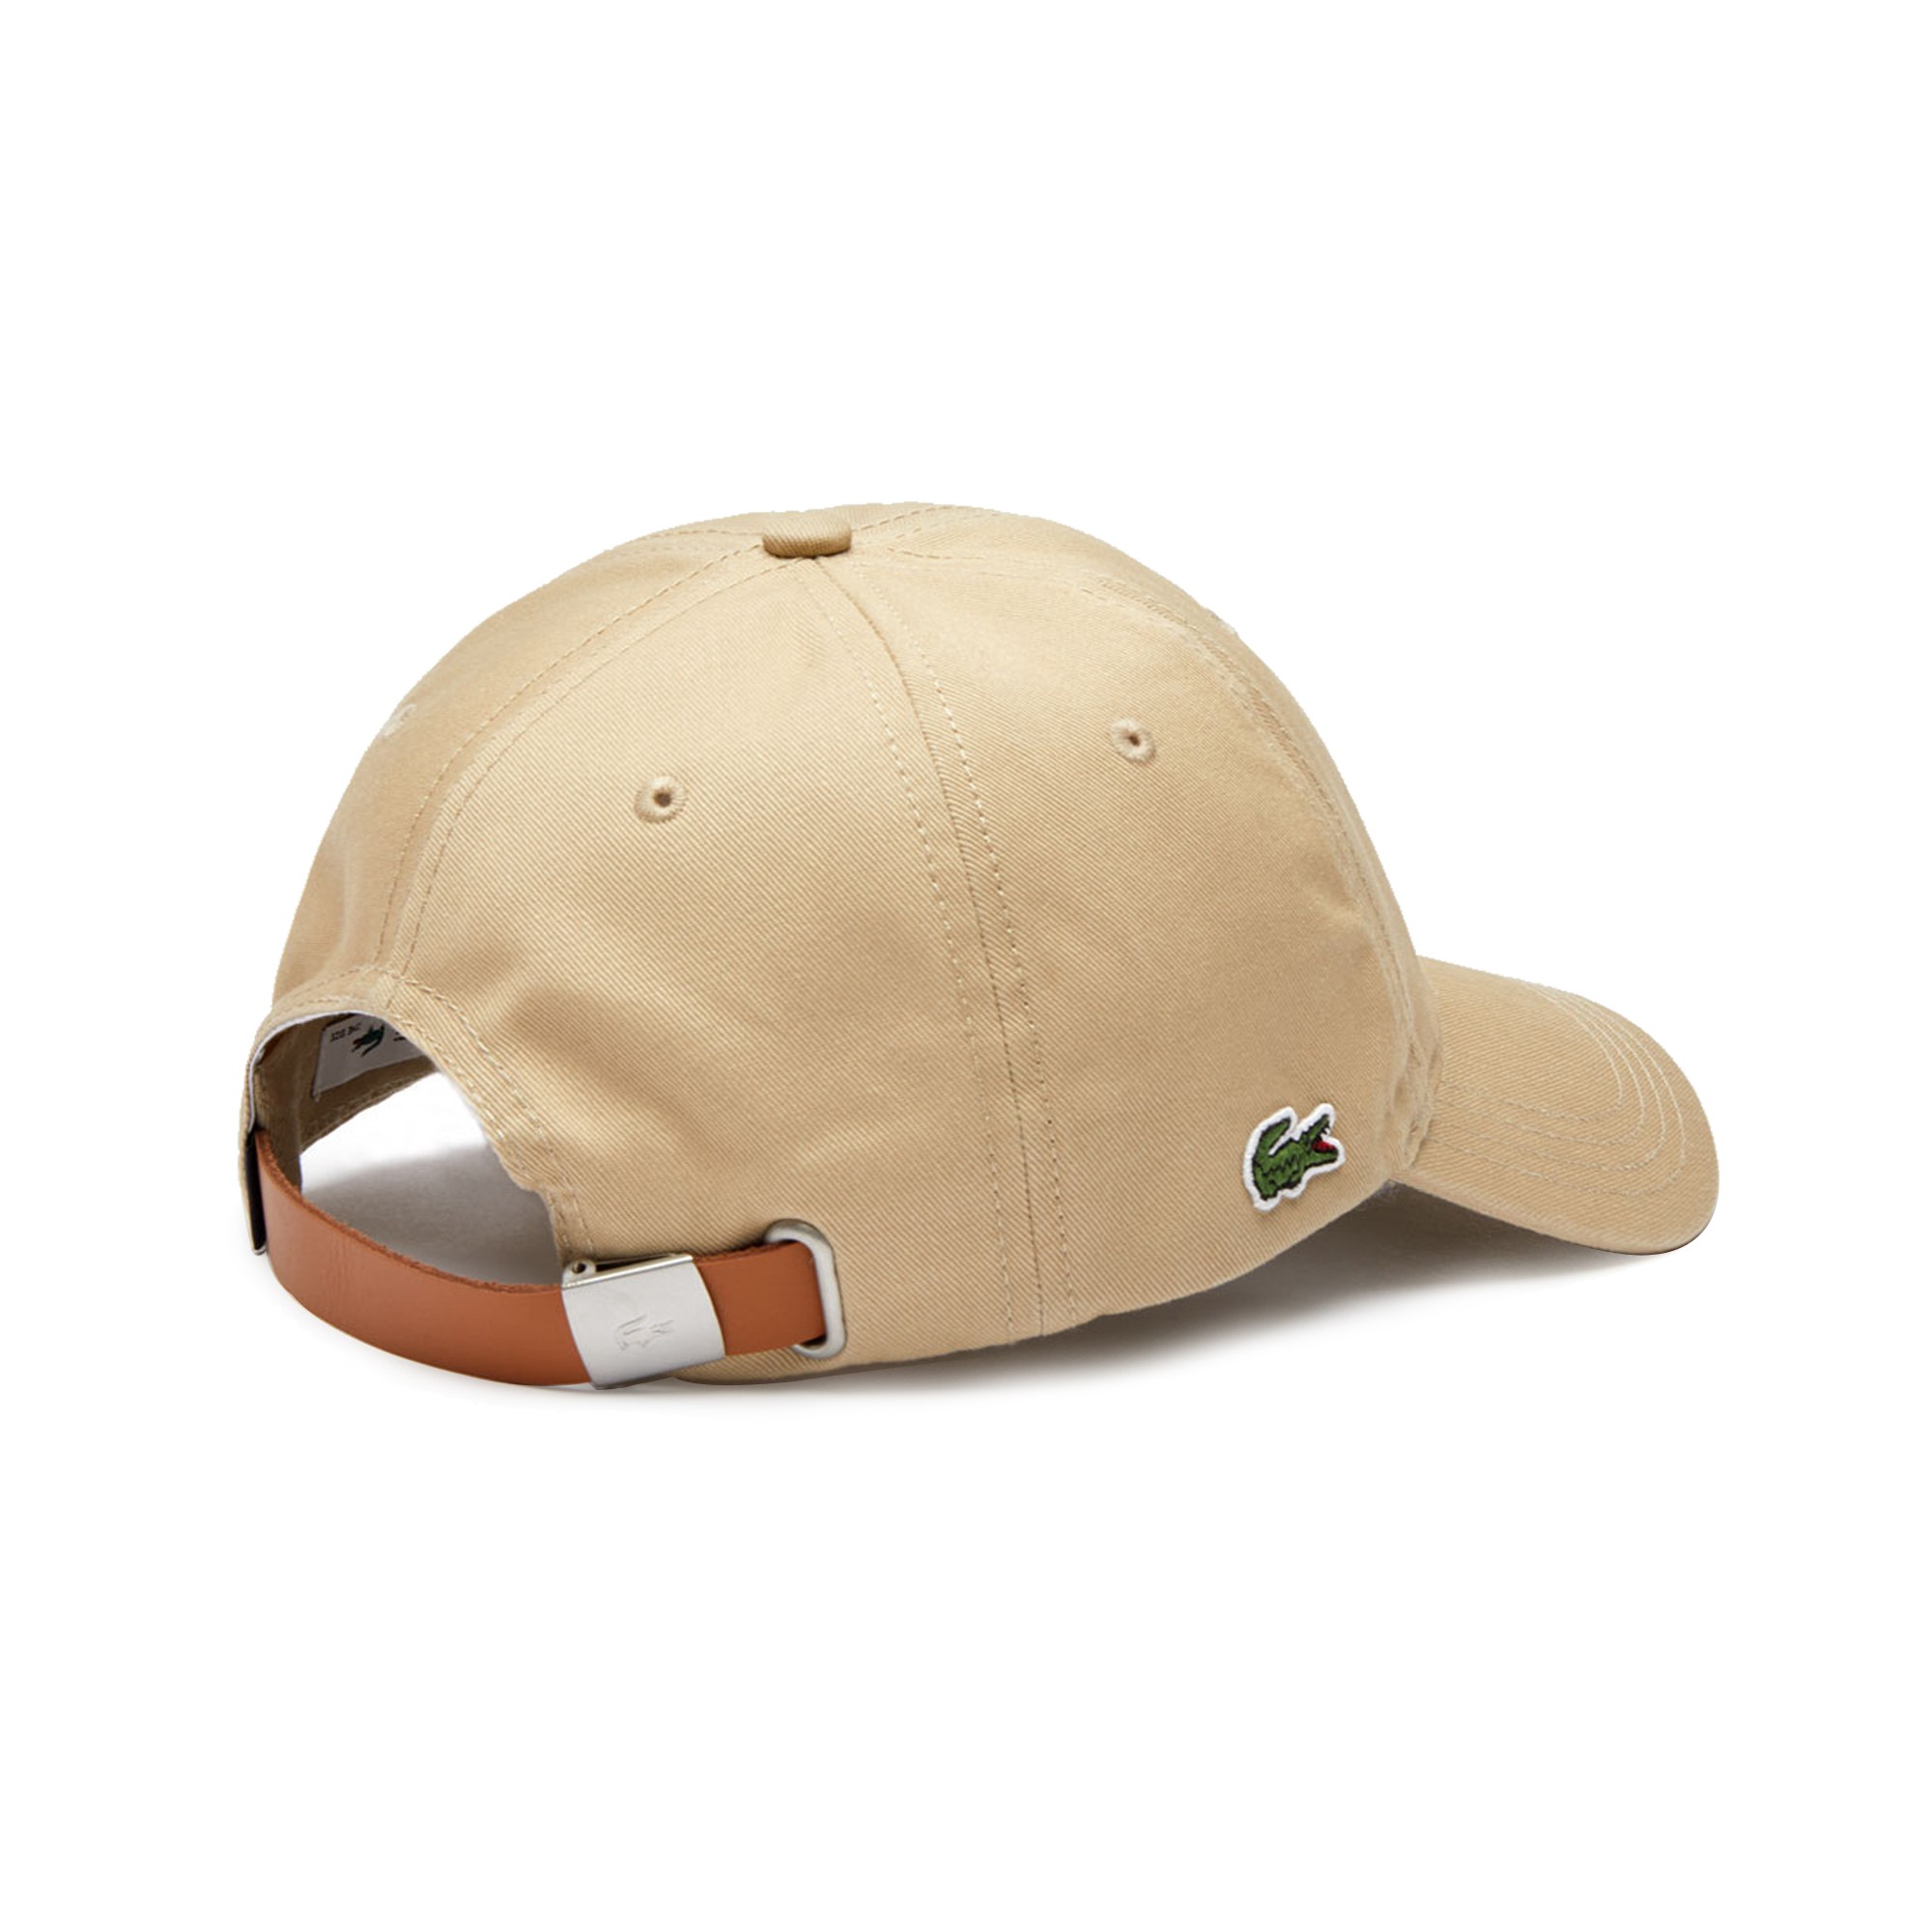 LACOSTE Caps visors VIENNOIS RK4709-00 and 02S